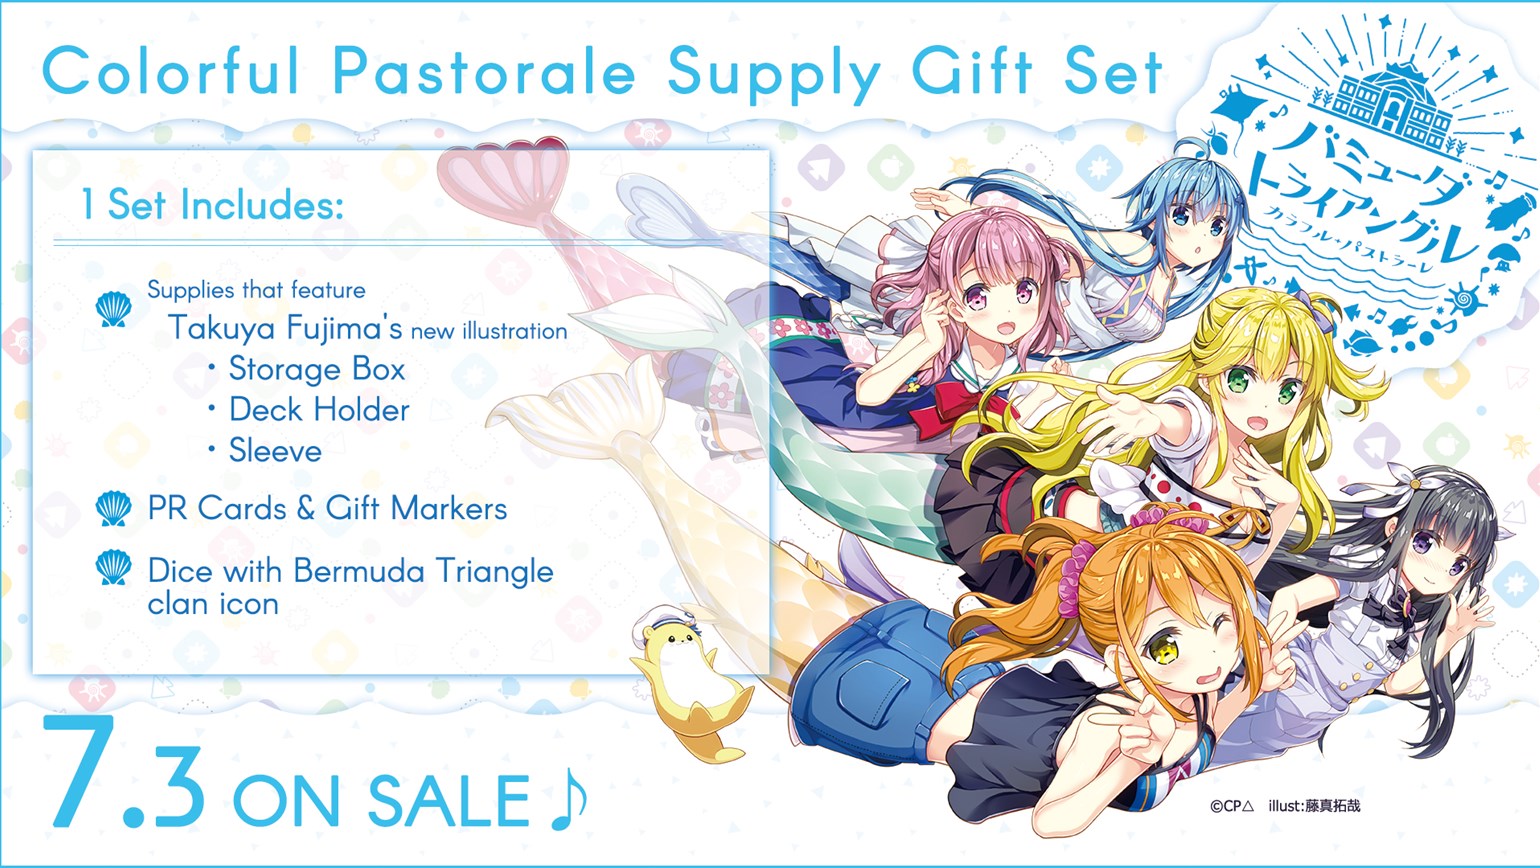 English Edition Cardfight!! Vanguard Special Series 02: Colorful Pastorale Supply Gift Set Coming to Stores on July 3rd